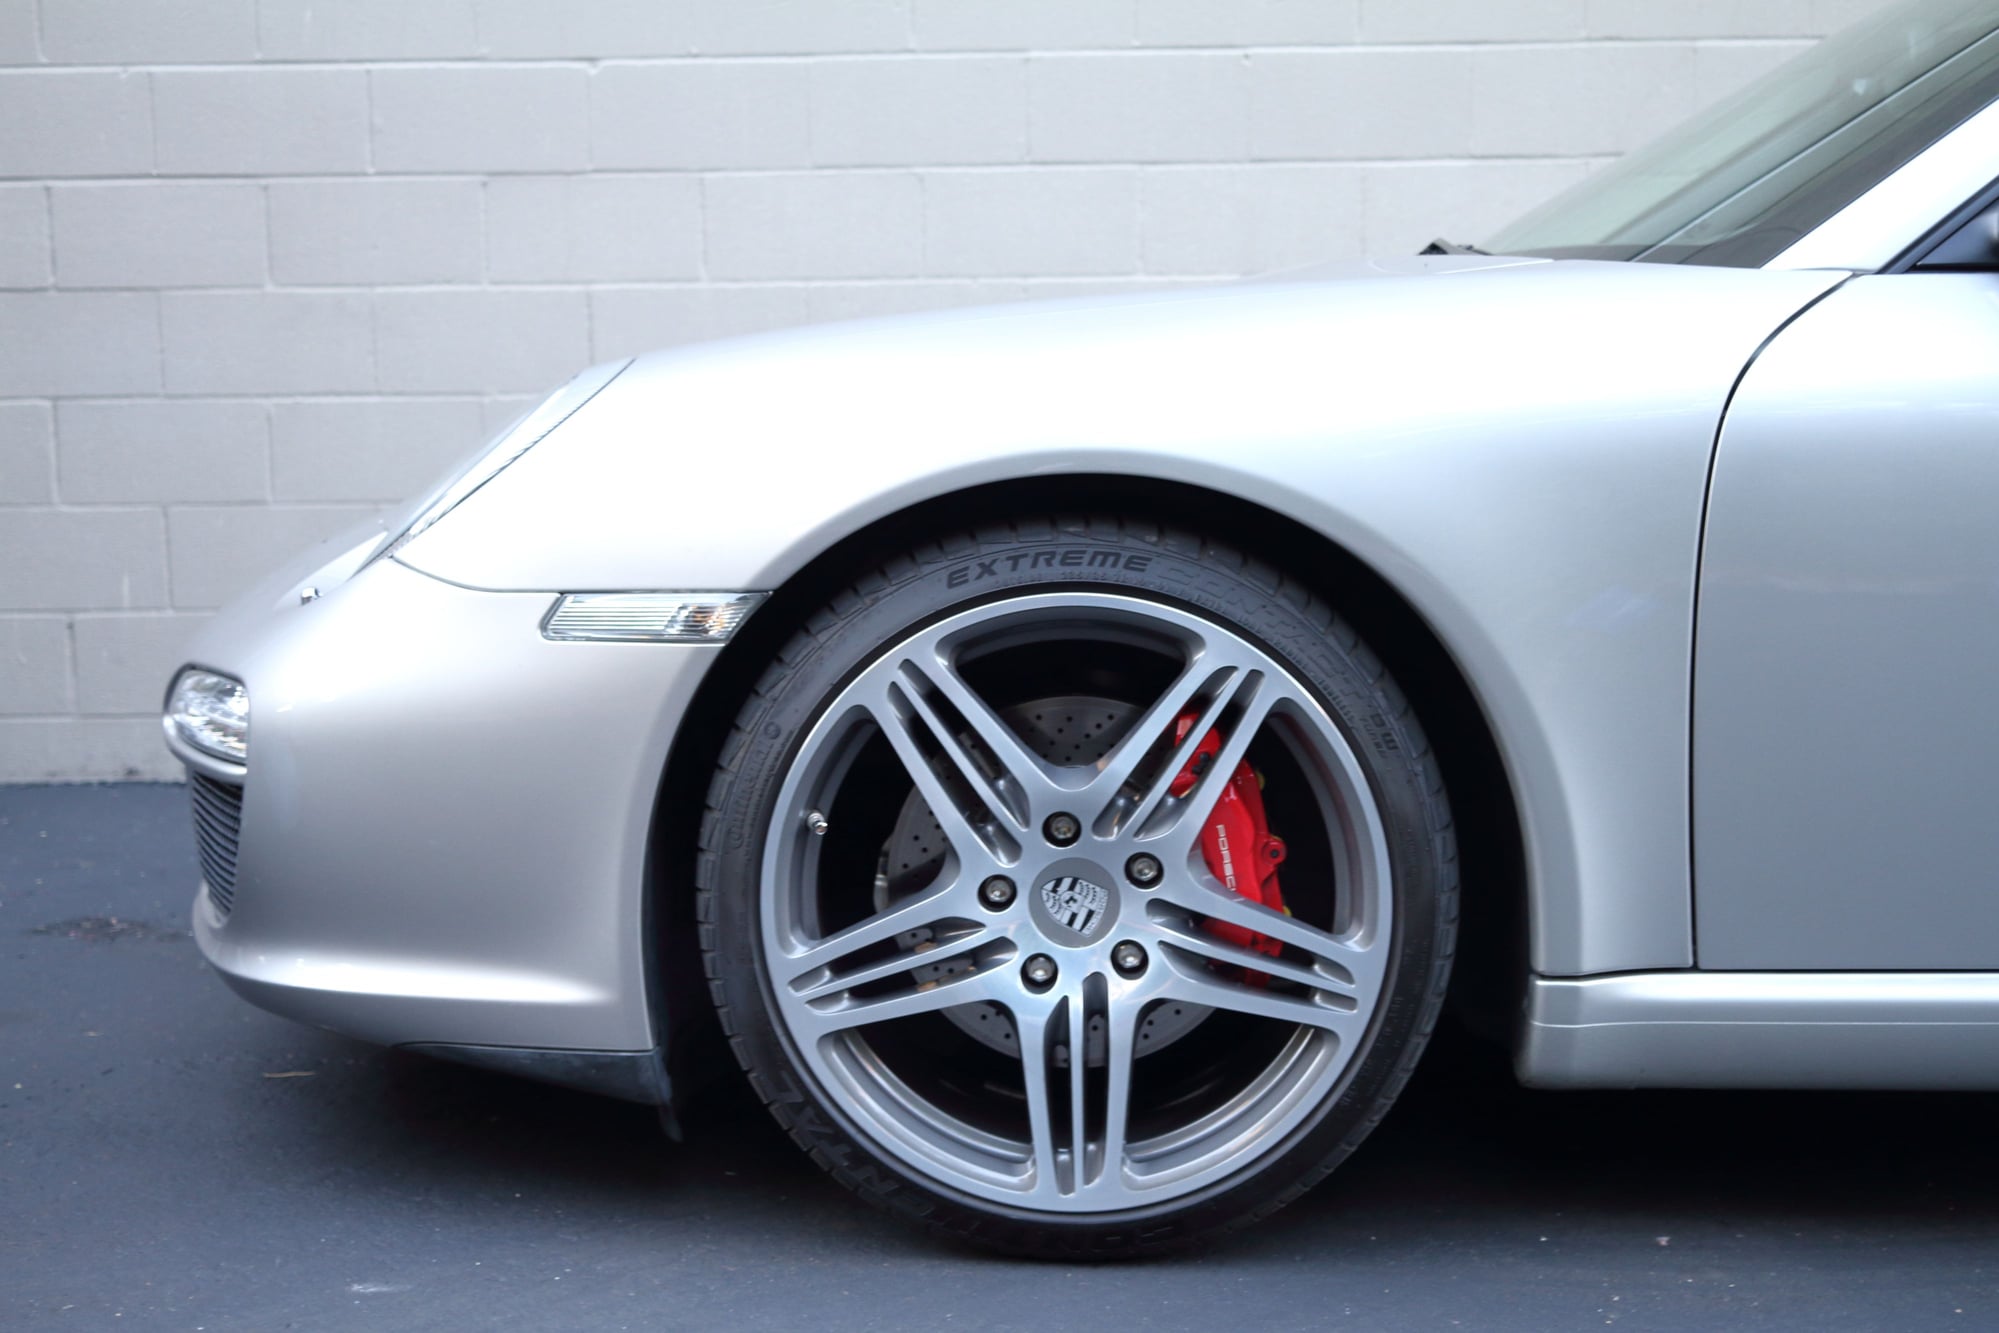 2012 Porsche 911 - rare 2012 997.2 6MT C2S in platinum silver in excellent mechanical condition - Used - VIN WP0AB2A99CS720798 - 56,000 Miles - 6 cyl - 2WD - Manual - Coupe - Silver - Campbell, CA 95008, United States